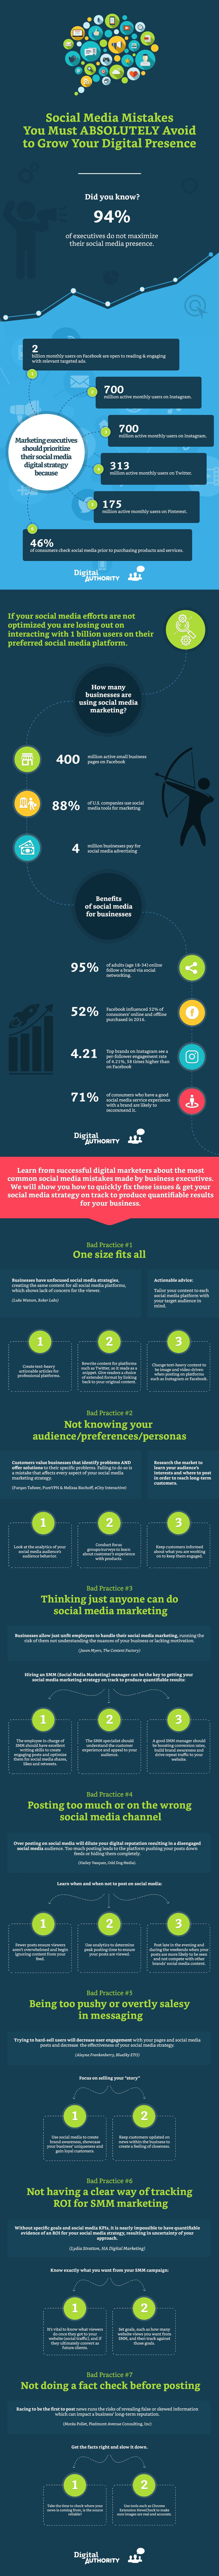 Infographic covering social media mistakes one must avoid to grow digital presence